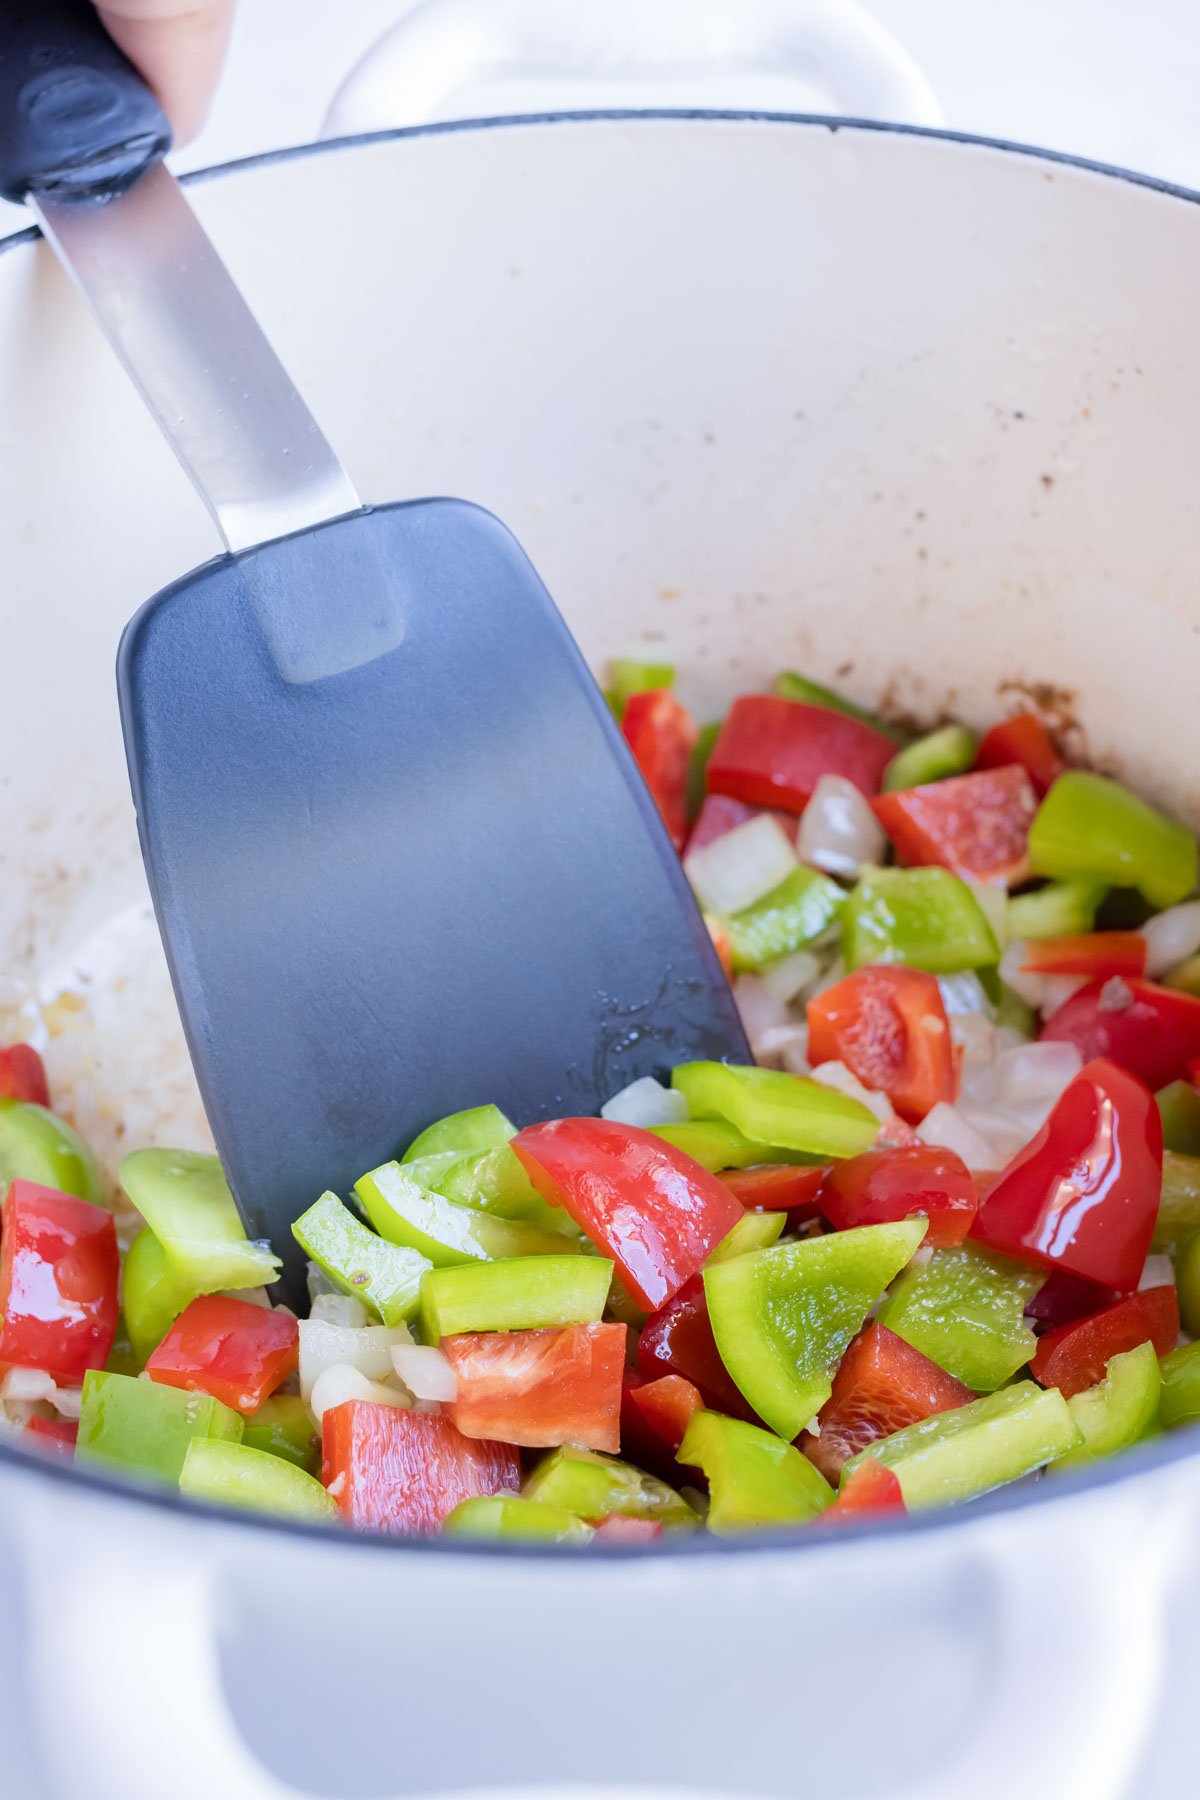 Bell peppers are added to the pot and cooked.